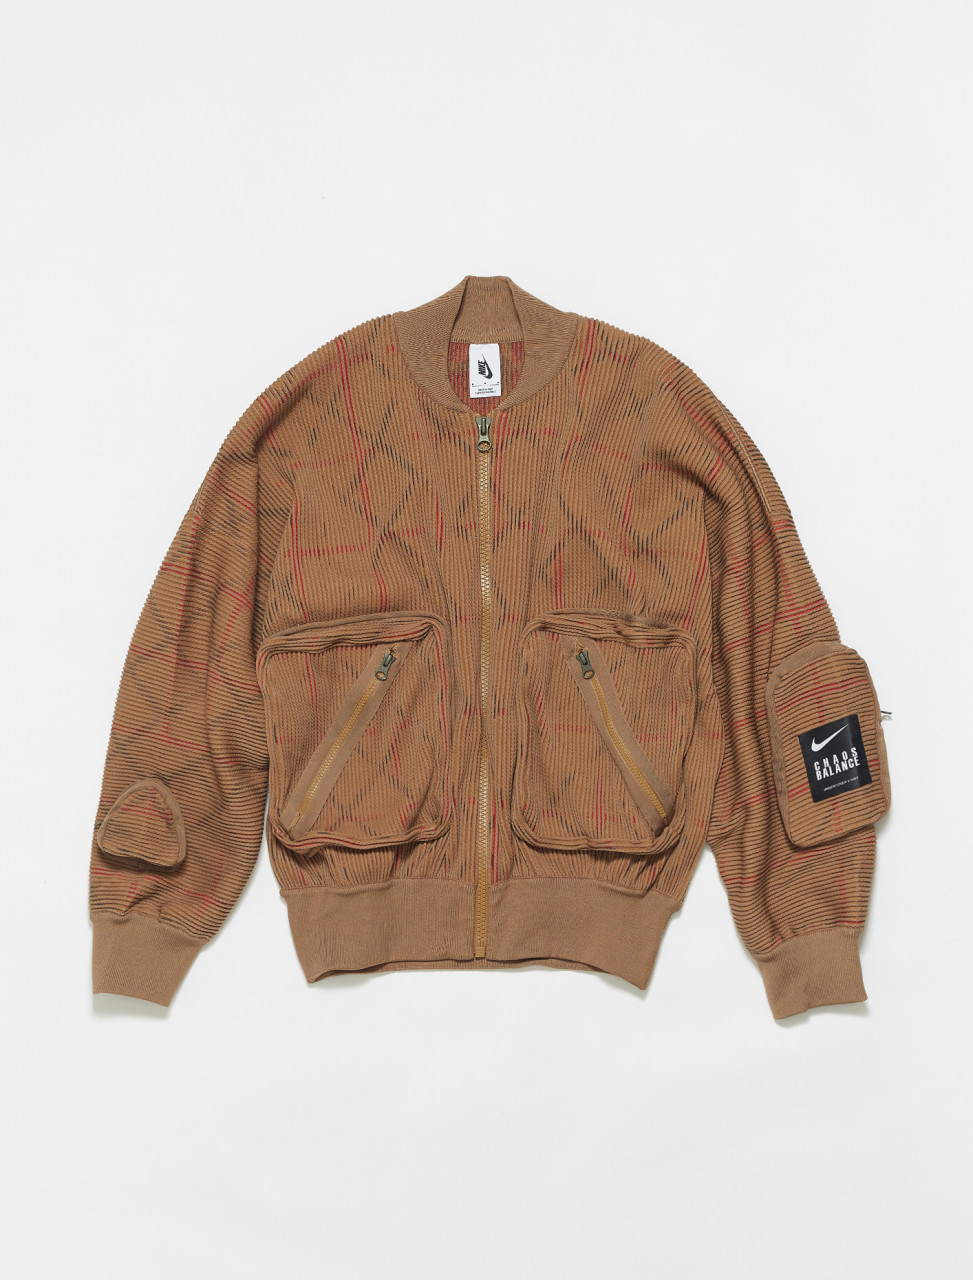 Nike x Undercover Knit MA-1 Bomber 